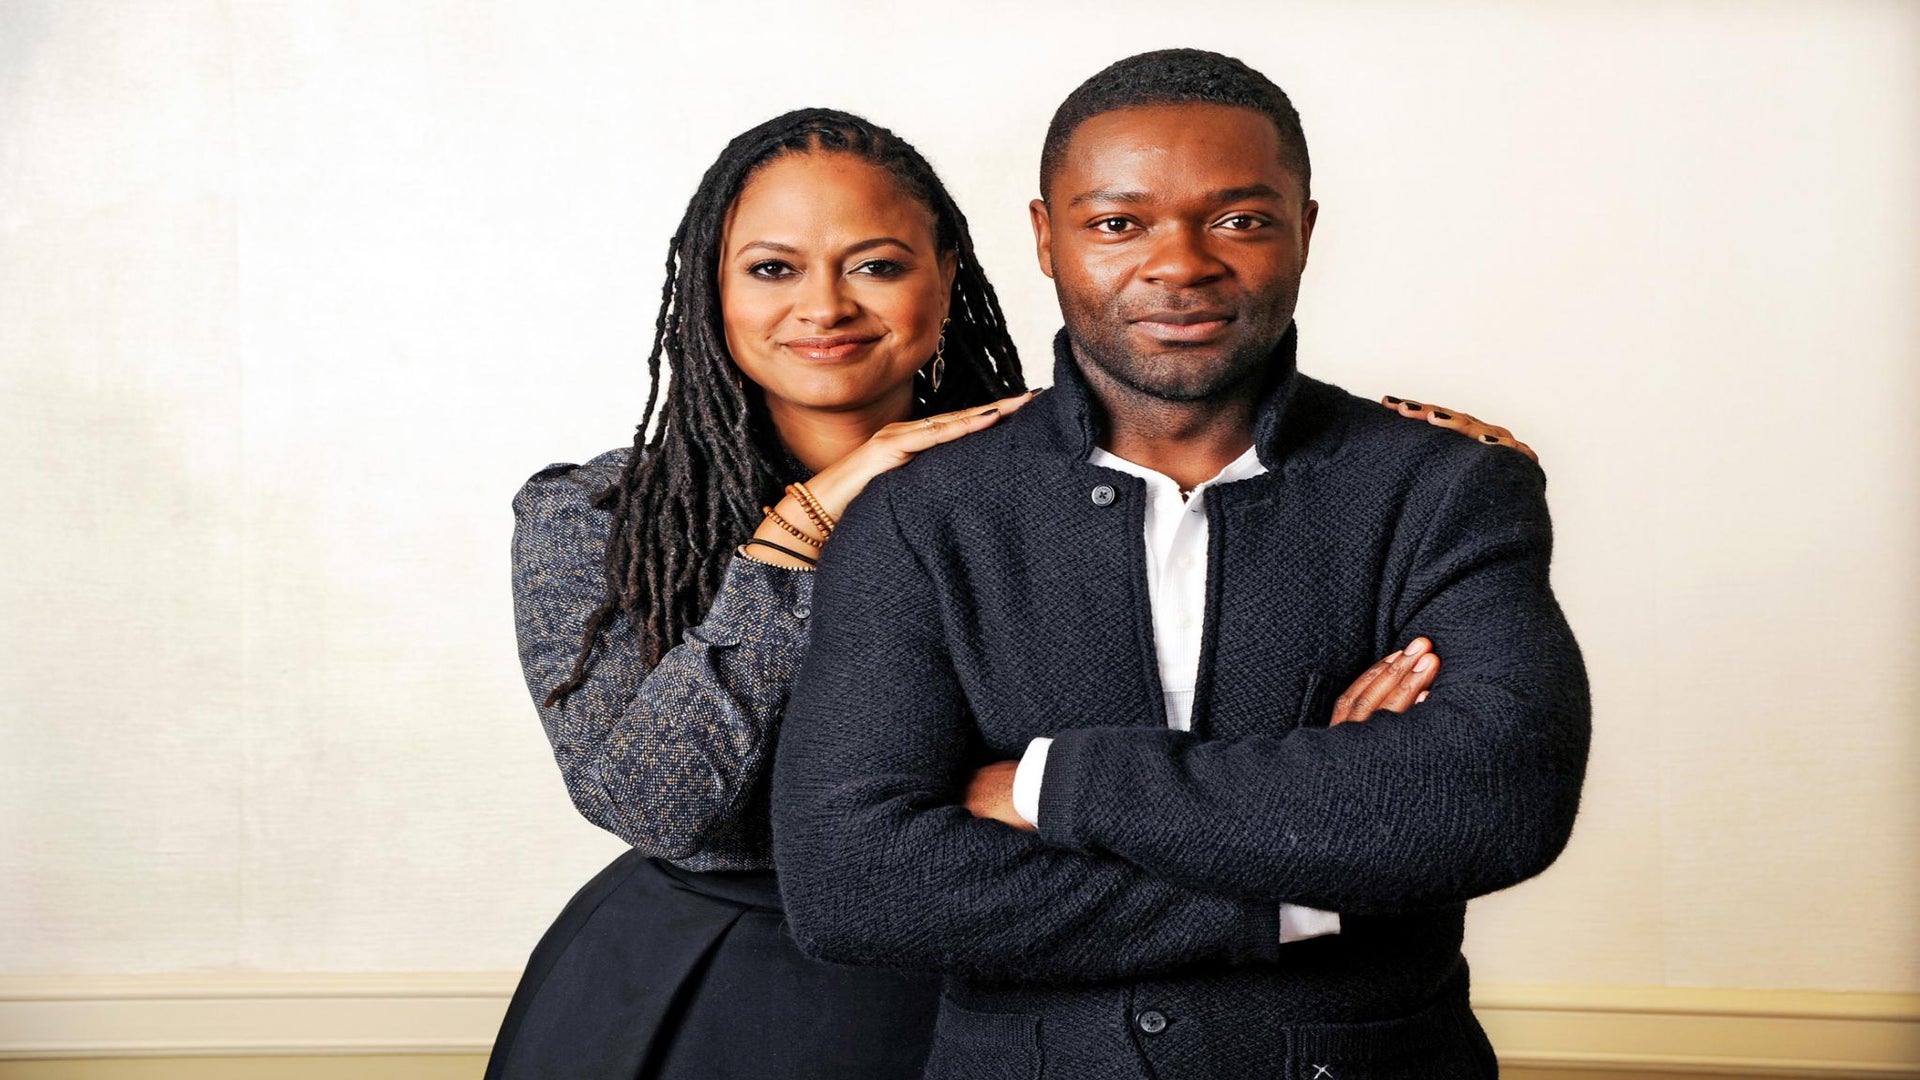 David Oyelowo Reveals Academy Punished ‘Selma’ Cast For Wearing ‘I Can’t Breathe’ Shirts: Ava DuVernay Confirms